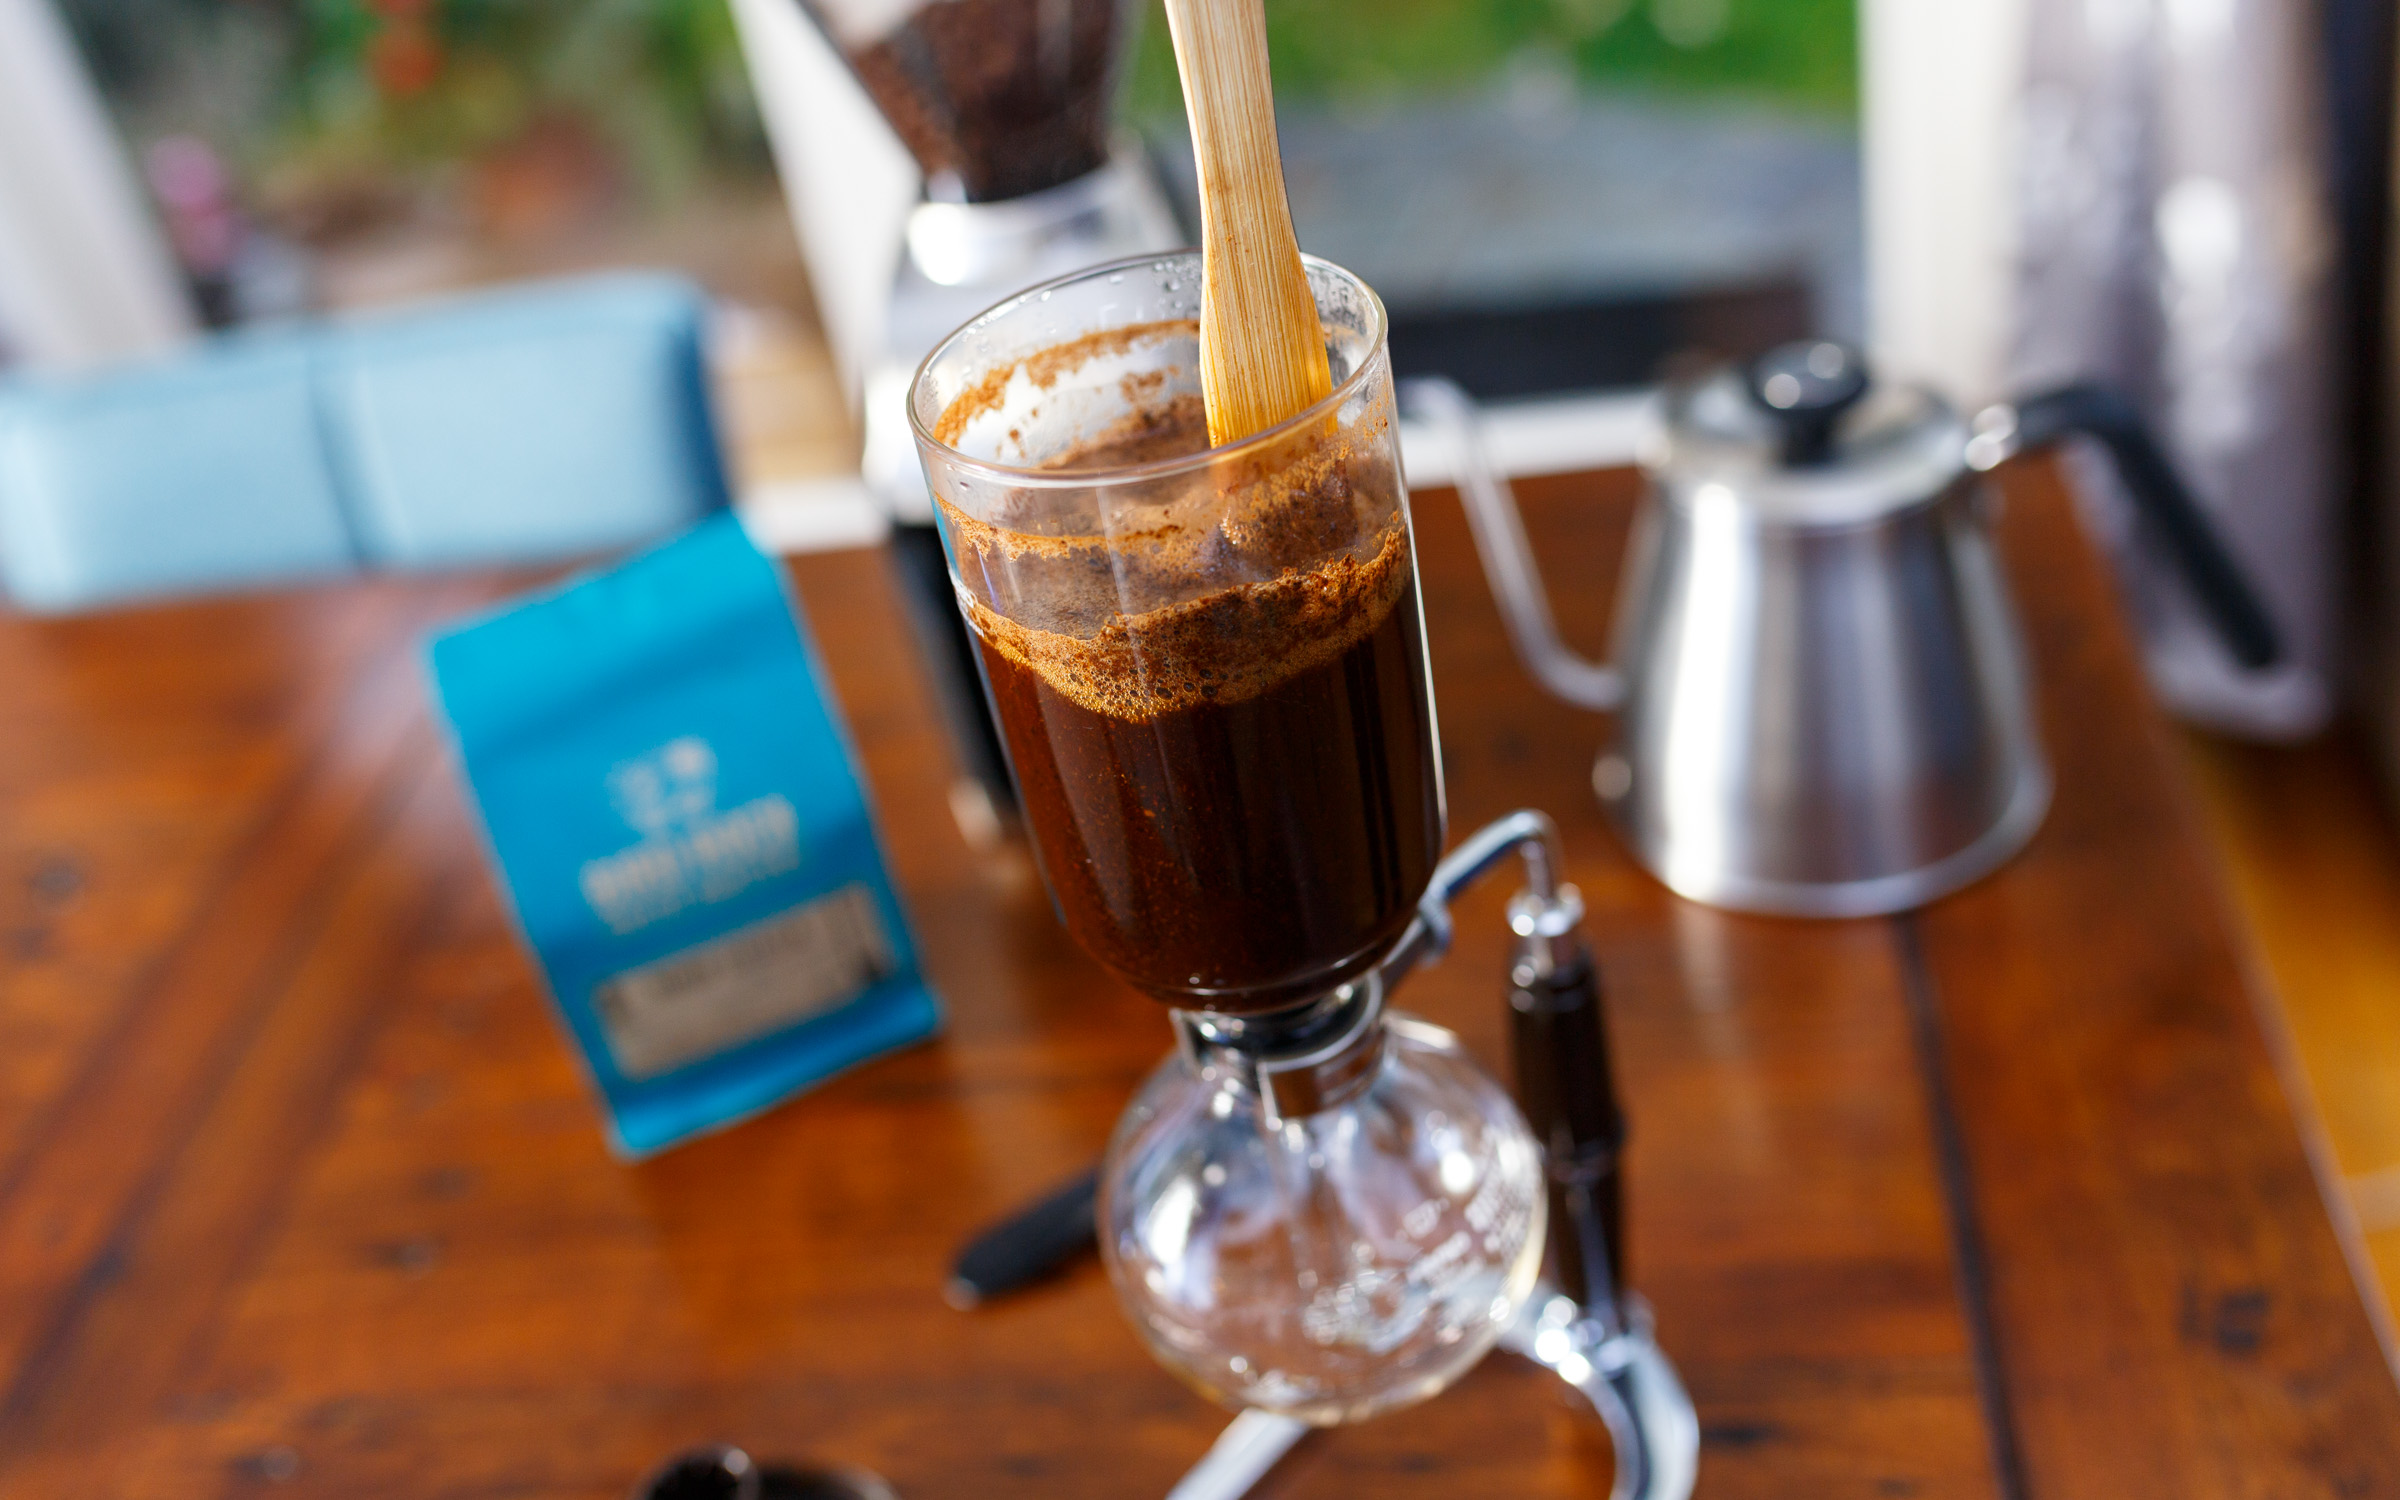 How to use a Siphon Coffee Maker » CoffeeGeek